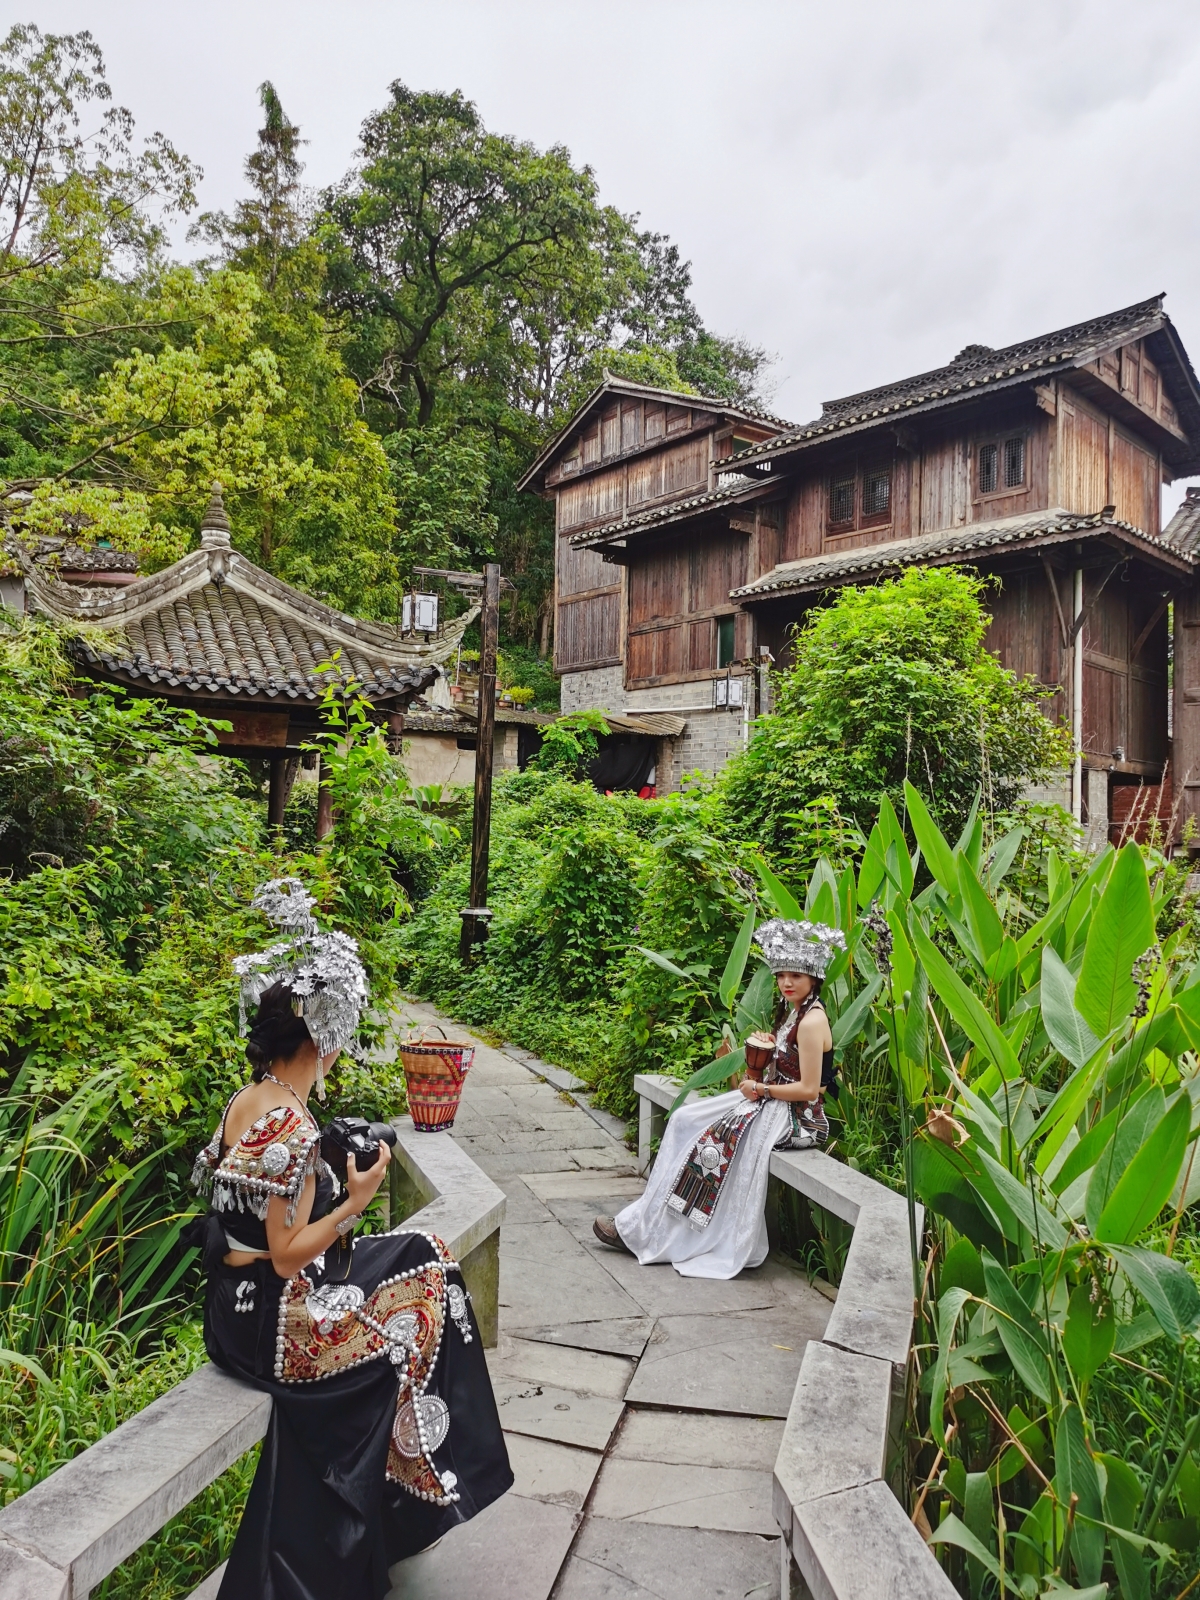 A tourist wearing ethnic dress poses for a photo at Qingyan ancient town in Guiyang, southwest China's Guizhou Province, on August 28, 2023. /CGTN